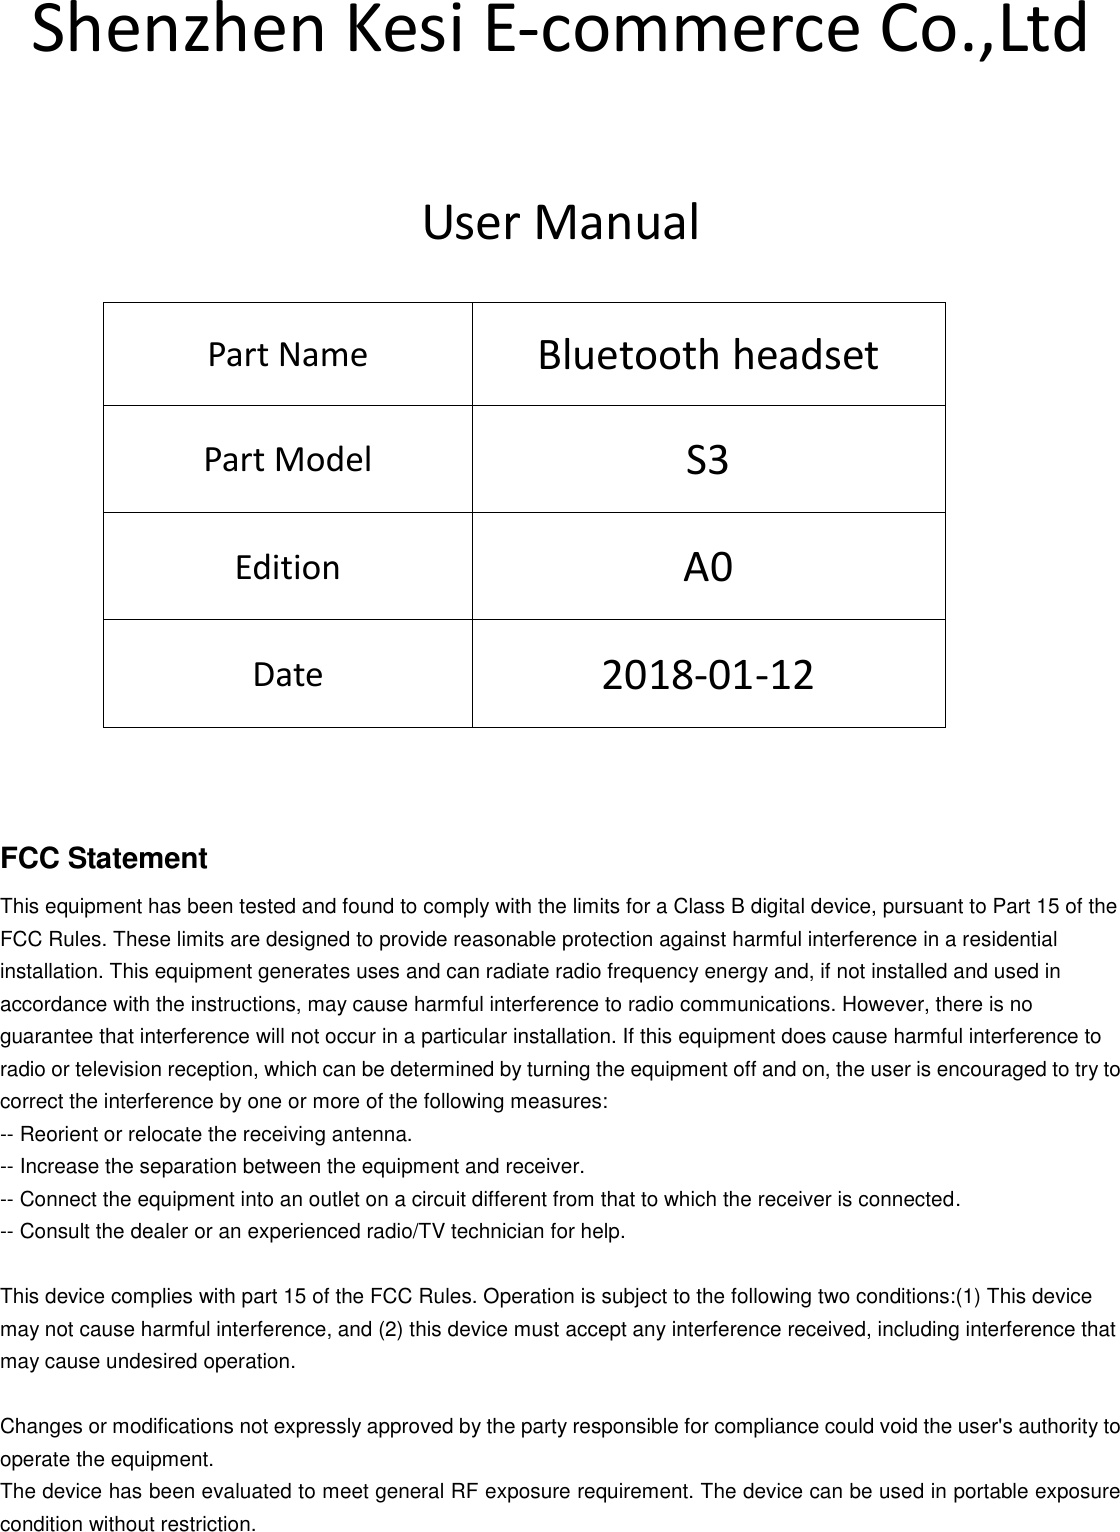 How To Site A User Manual